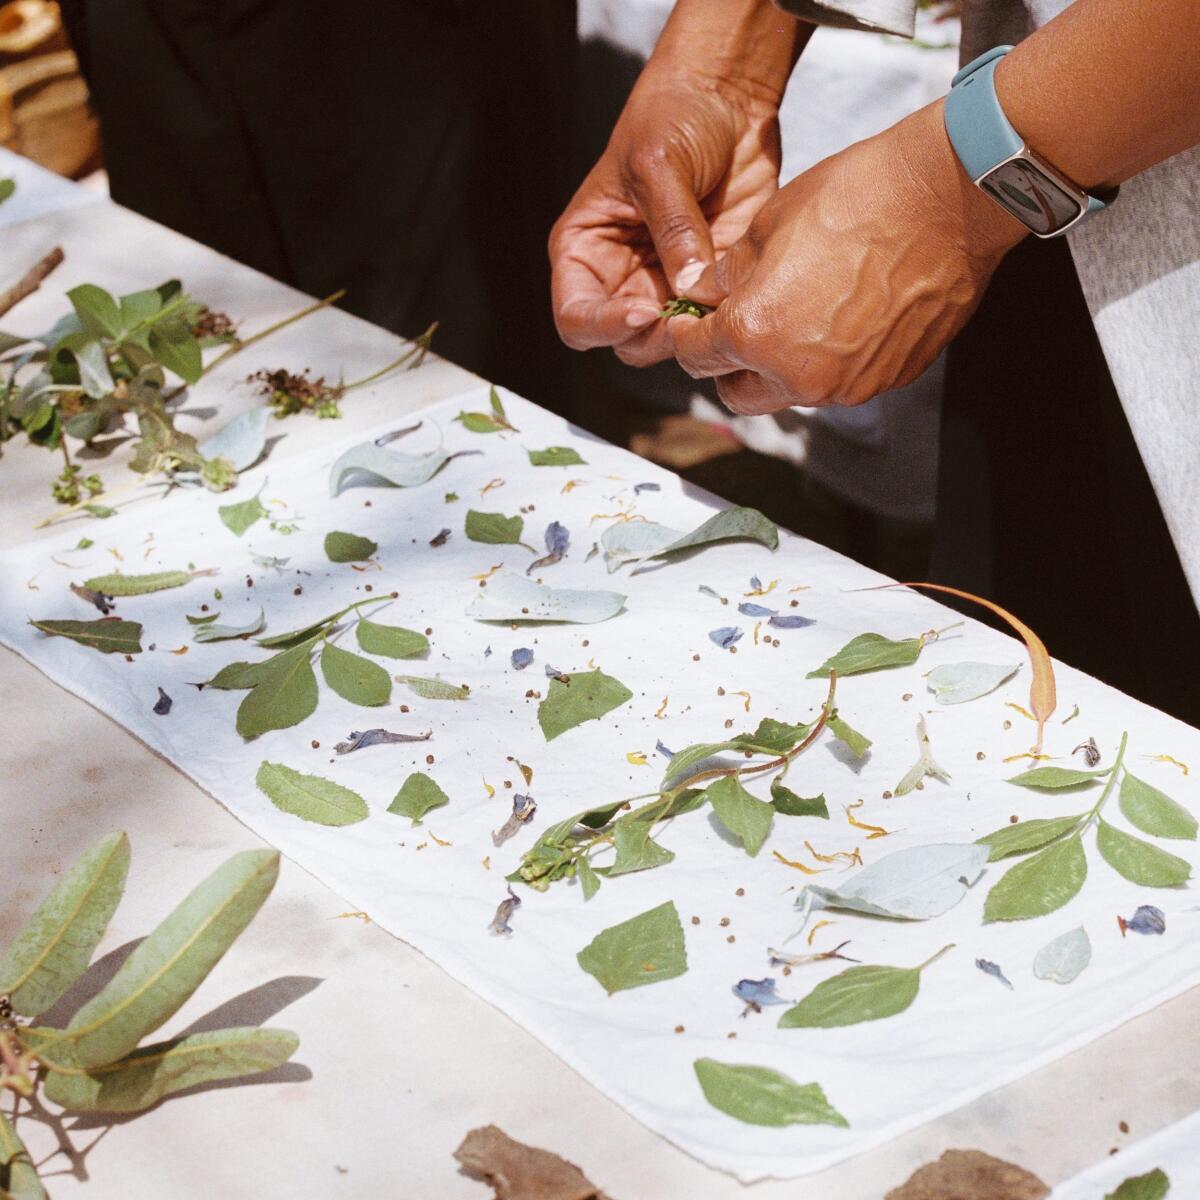 Leaves, flowers and seeds are placed on a cloth ready to be used in natural dye-making